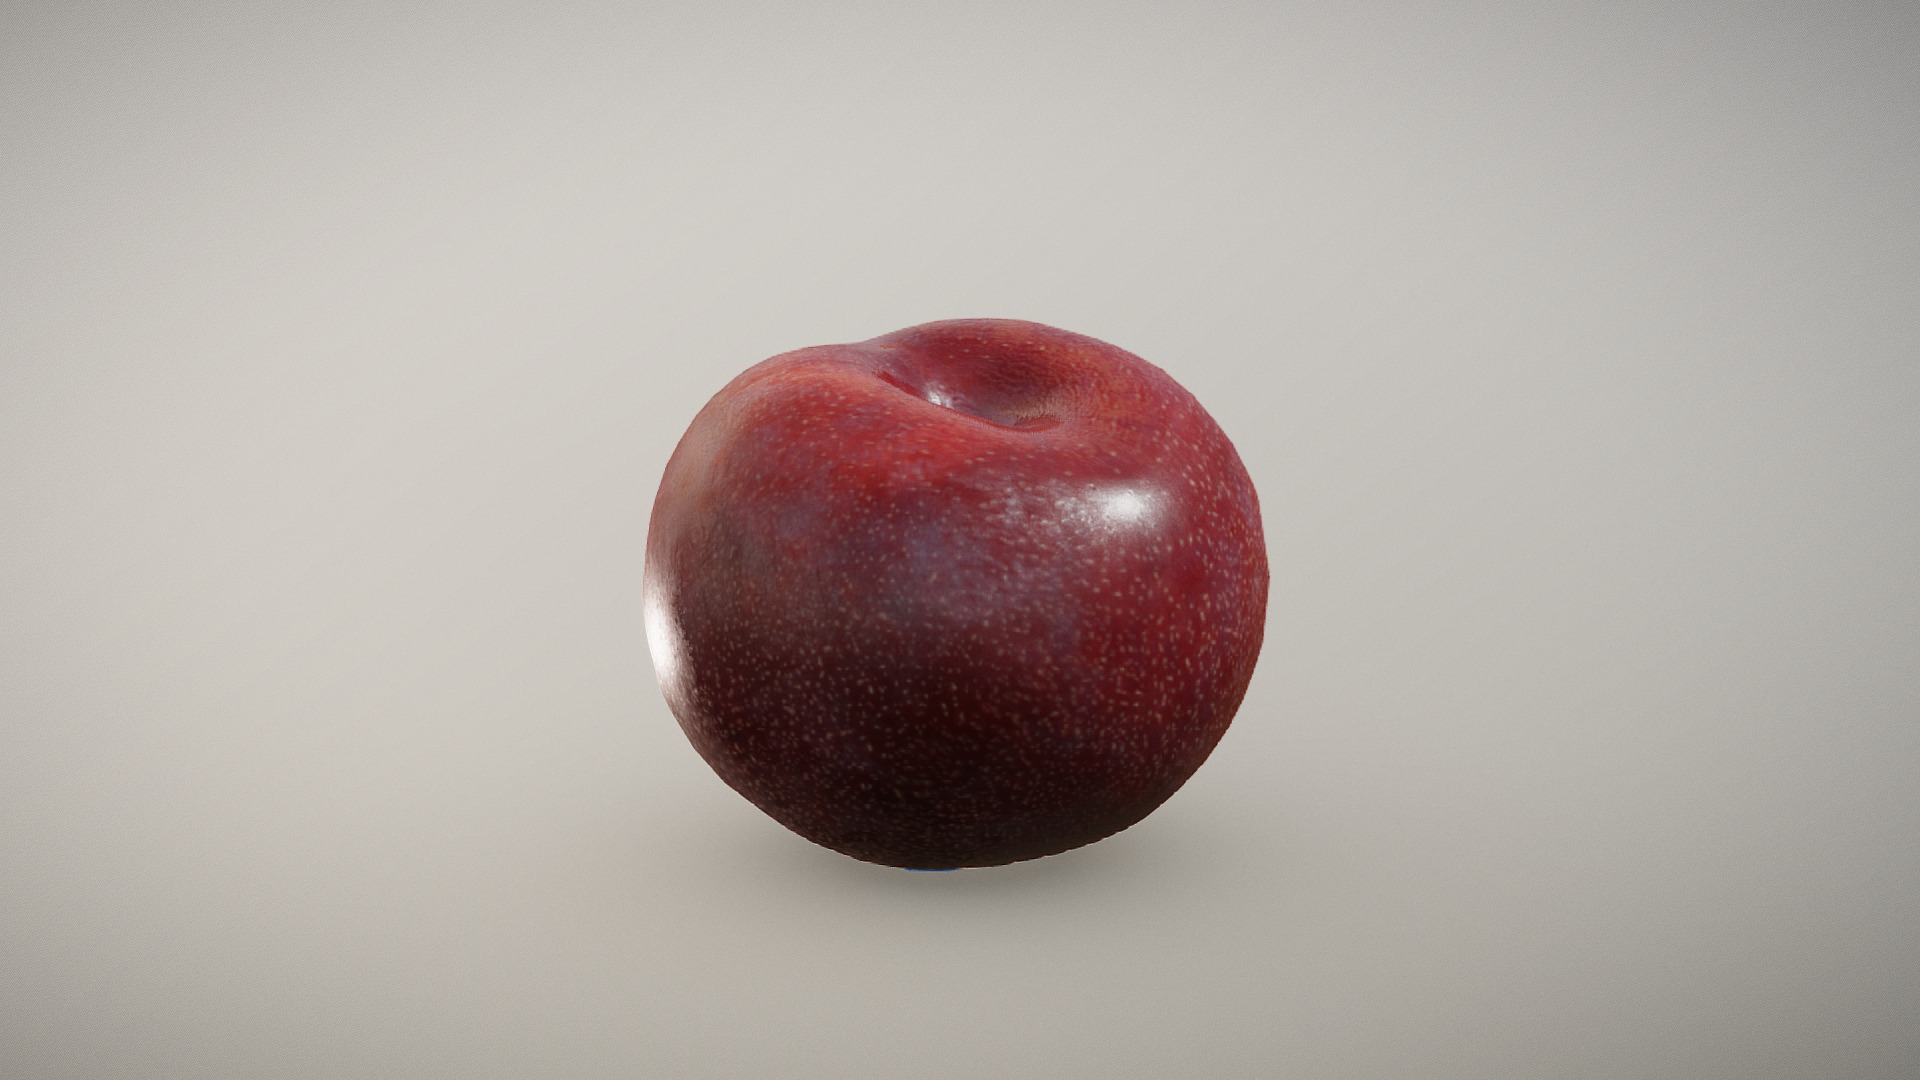 3D model Raspberry Jewel Pluot - This is a 3D model of the Raspberry Jewel Pluot. The 3D model is about a red apple on a white surface.